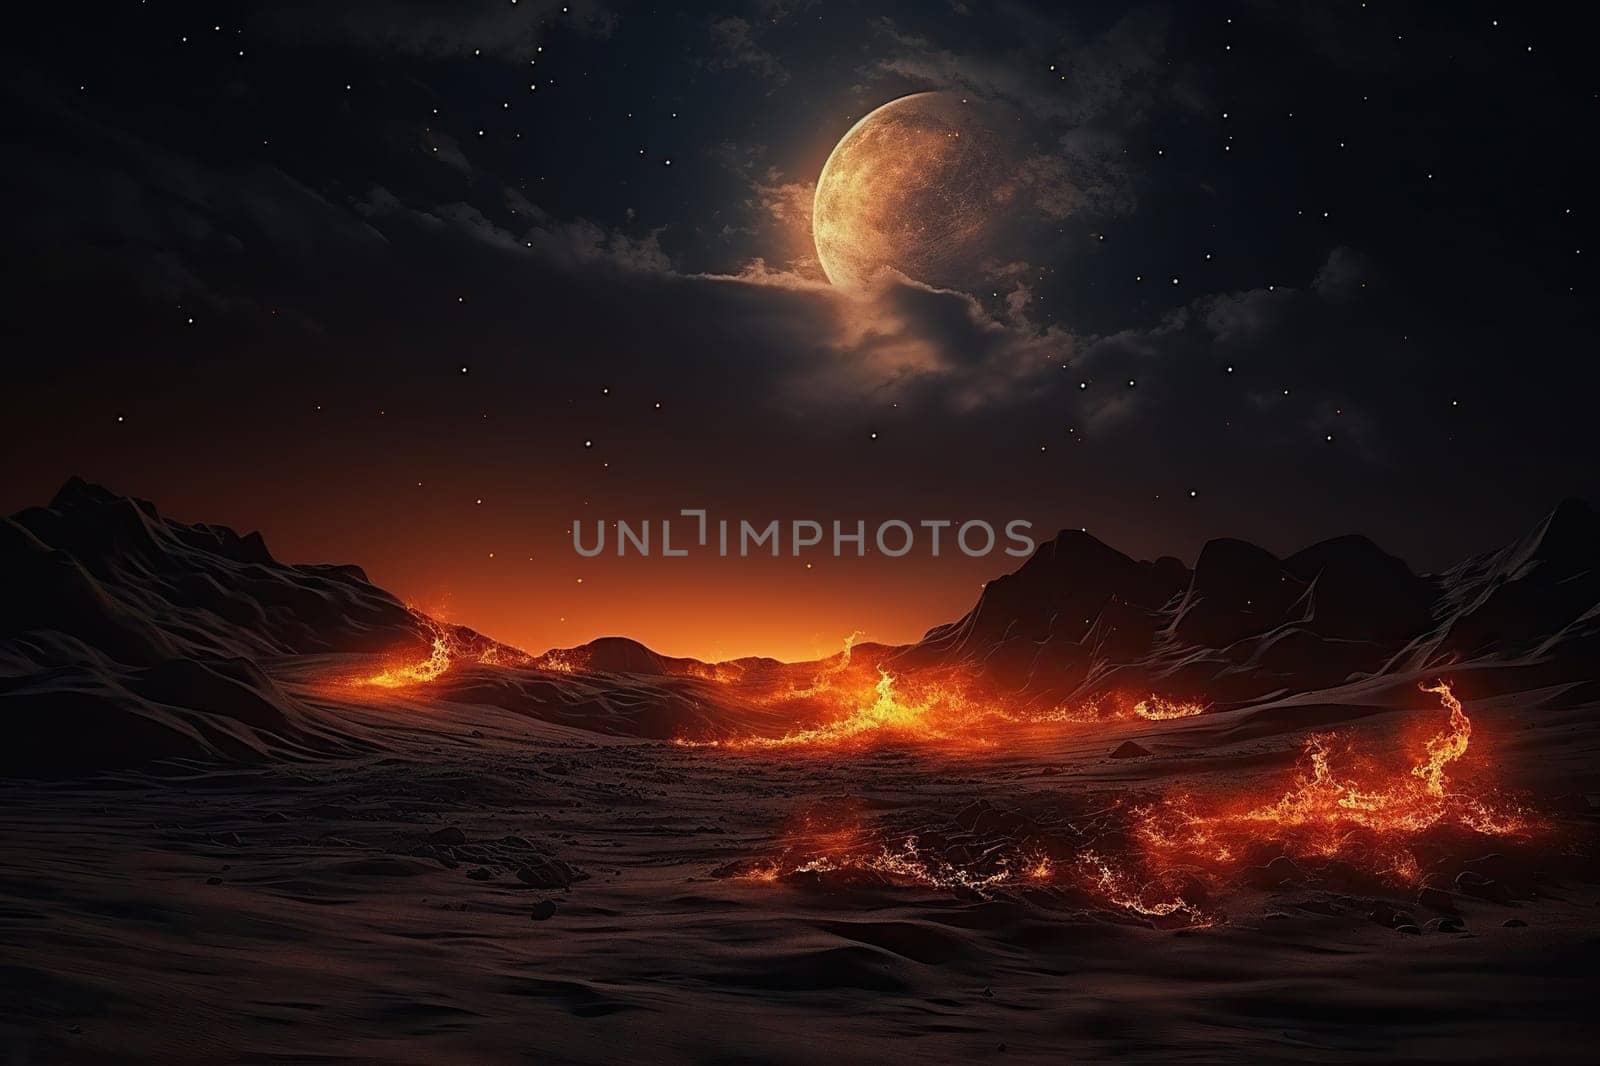 Night desert with fires on the sand in the light of a bright moon on a cloudy sky. Generated by artificial intelligence by Vovmar